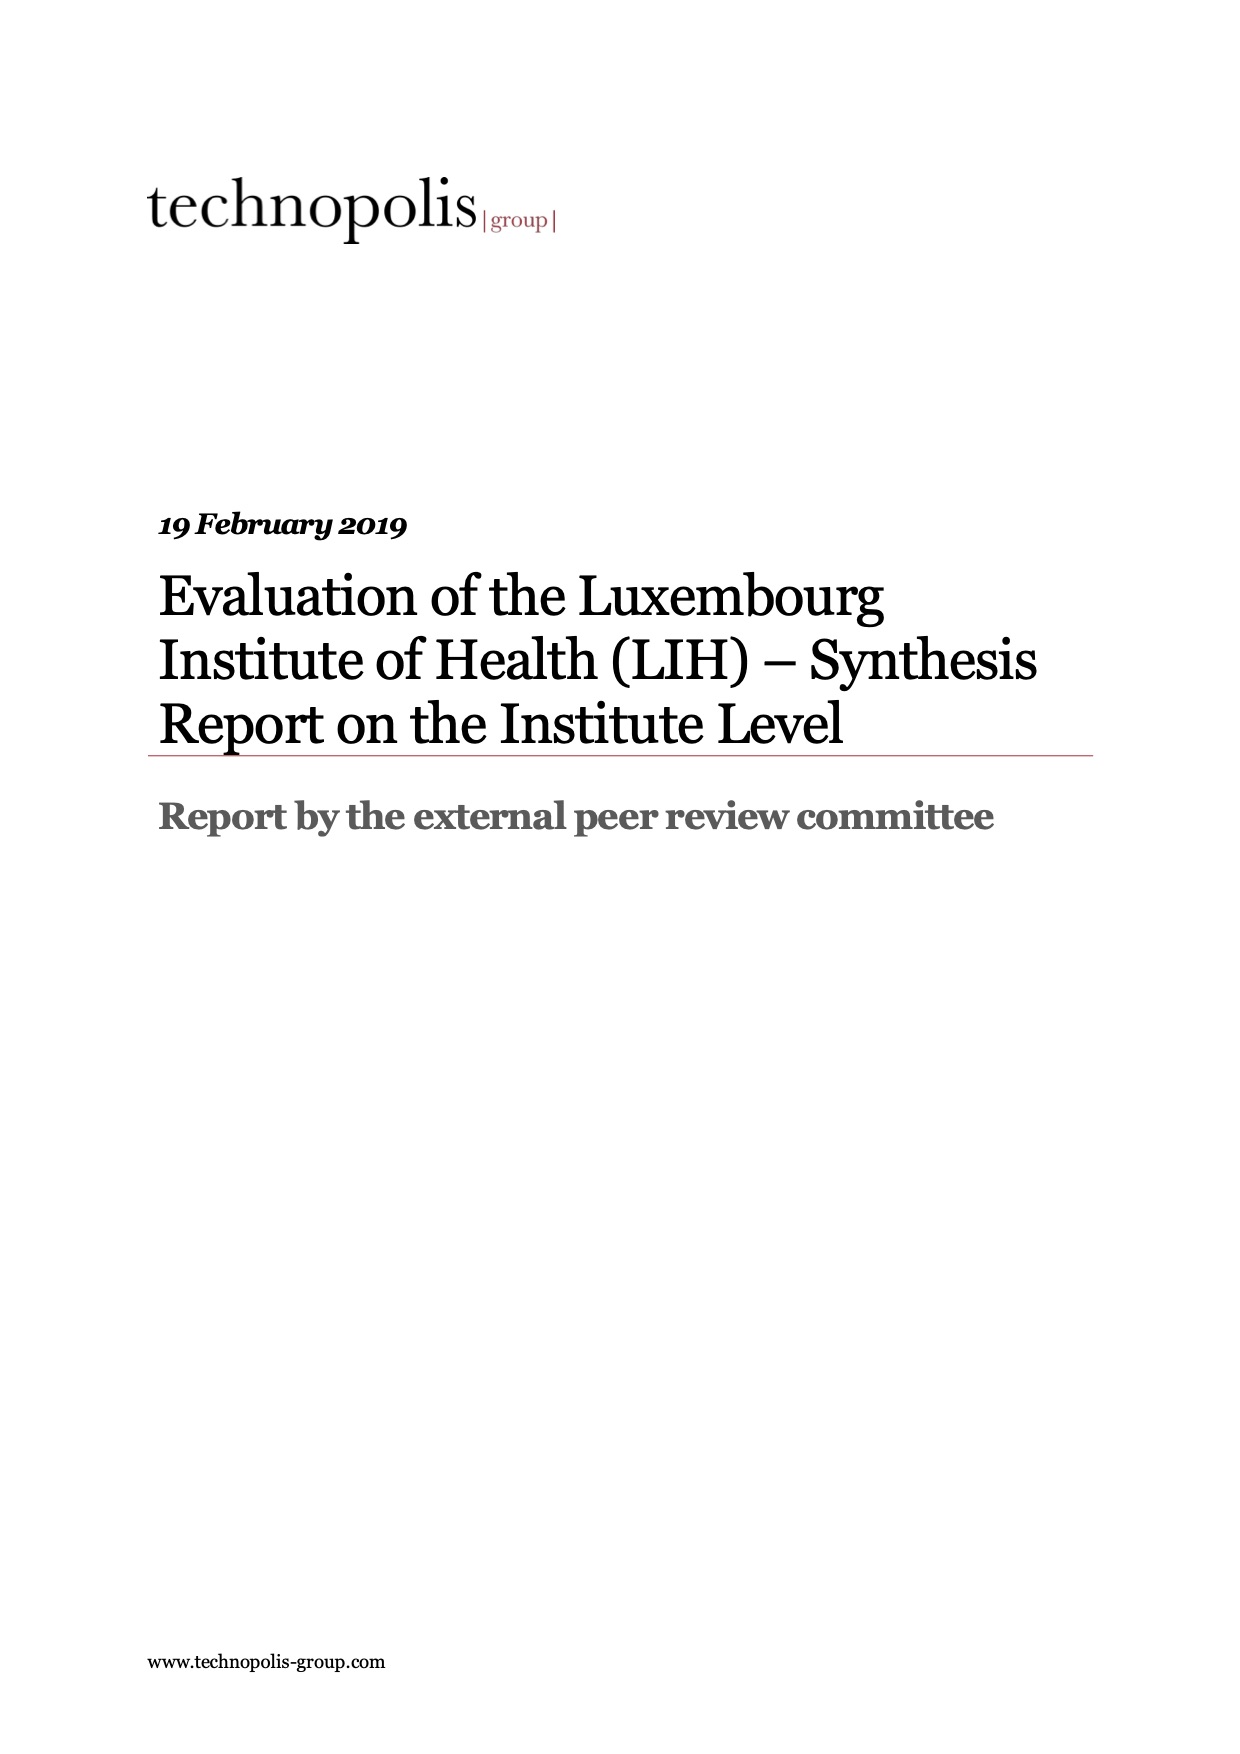 Evaluation of the Luxembourg Institute of Health (LIH)